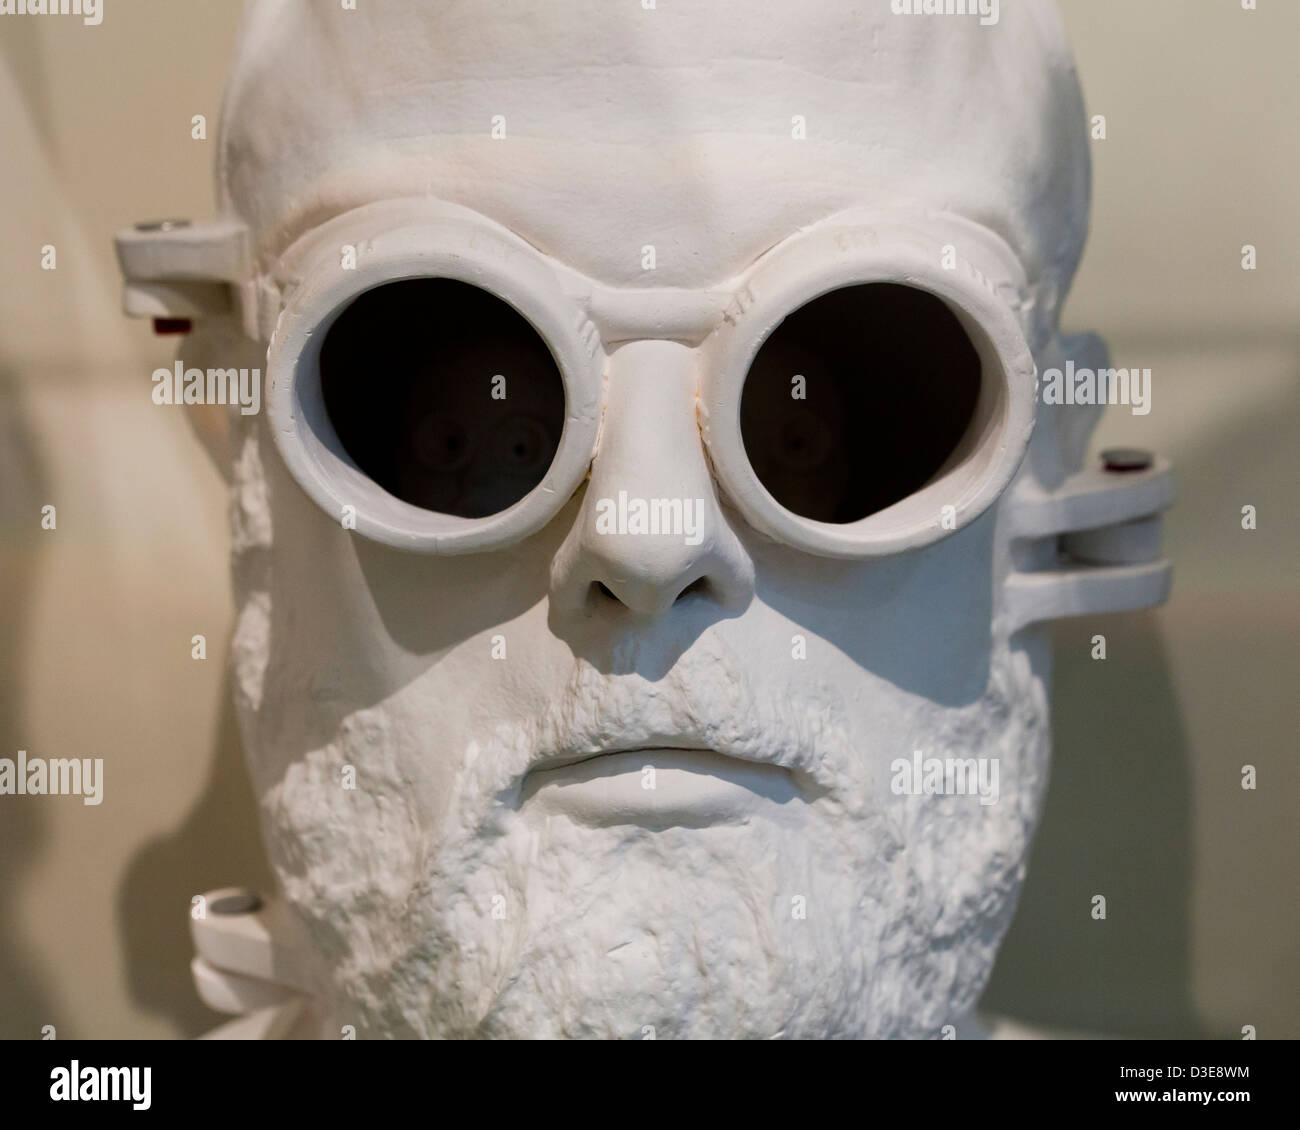 Goggles on face sculpture Stock Photo